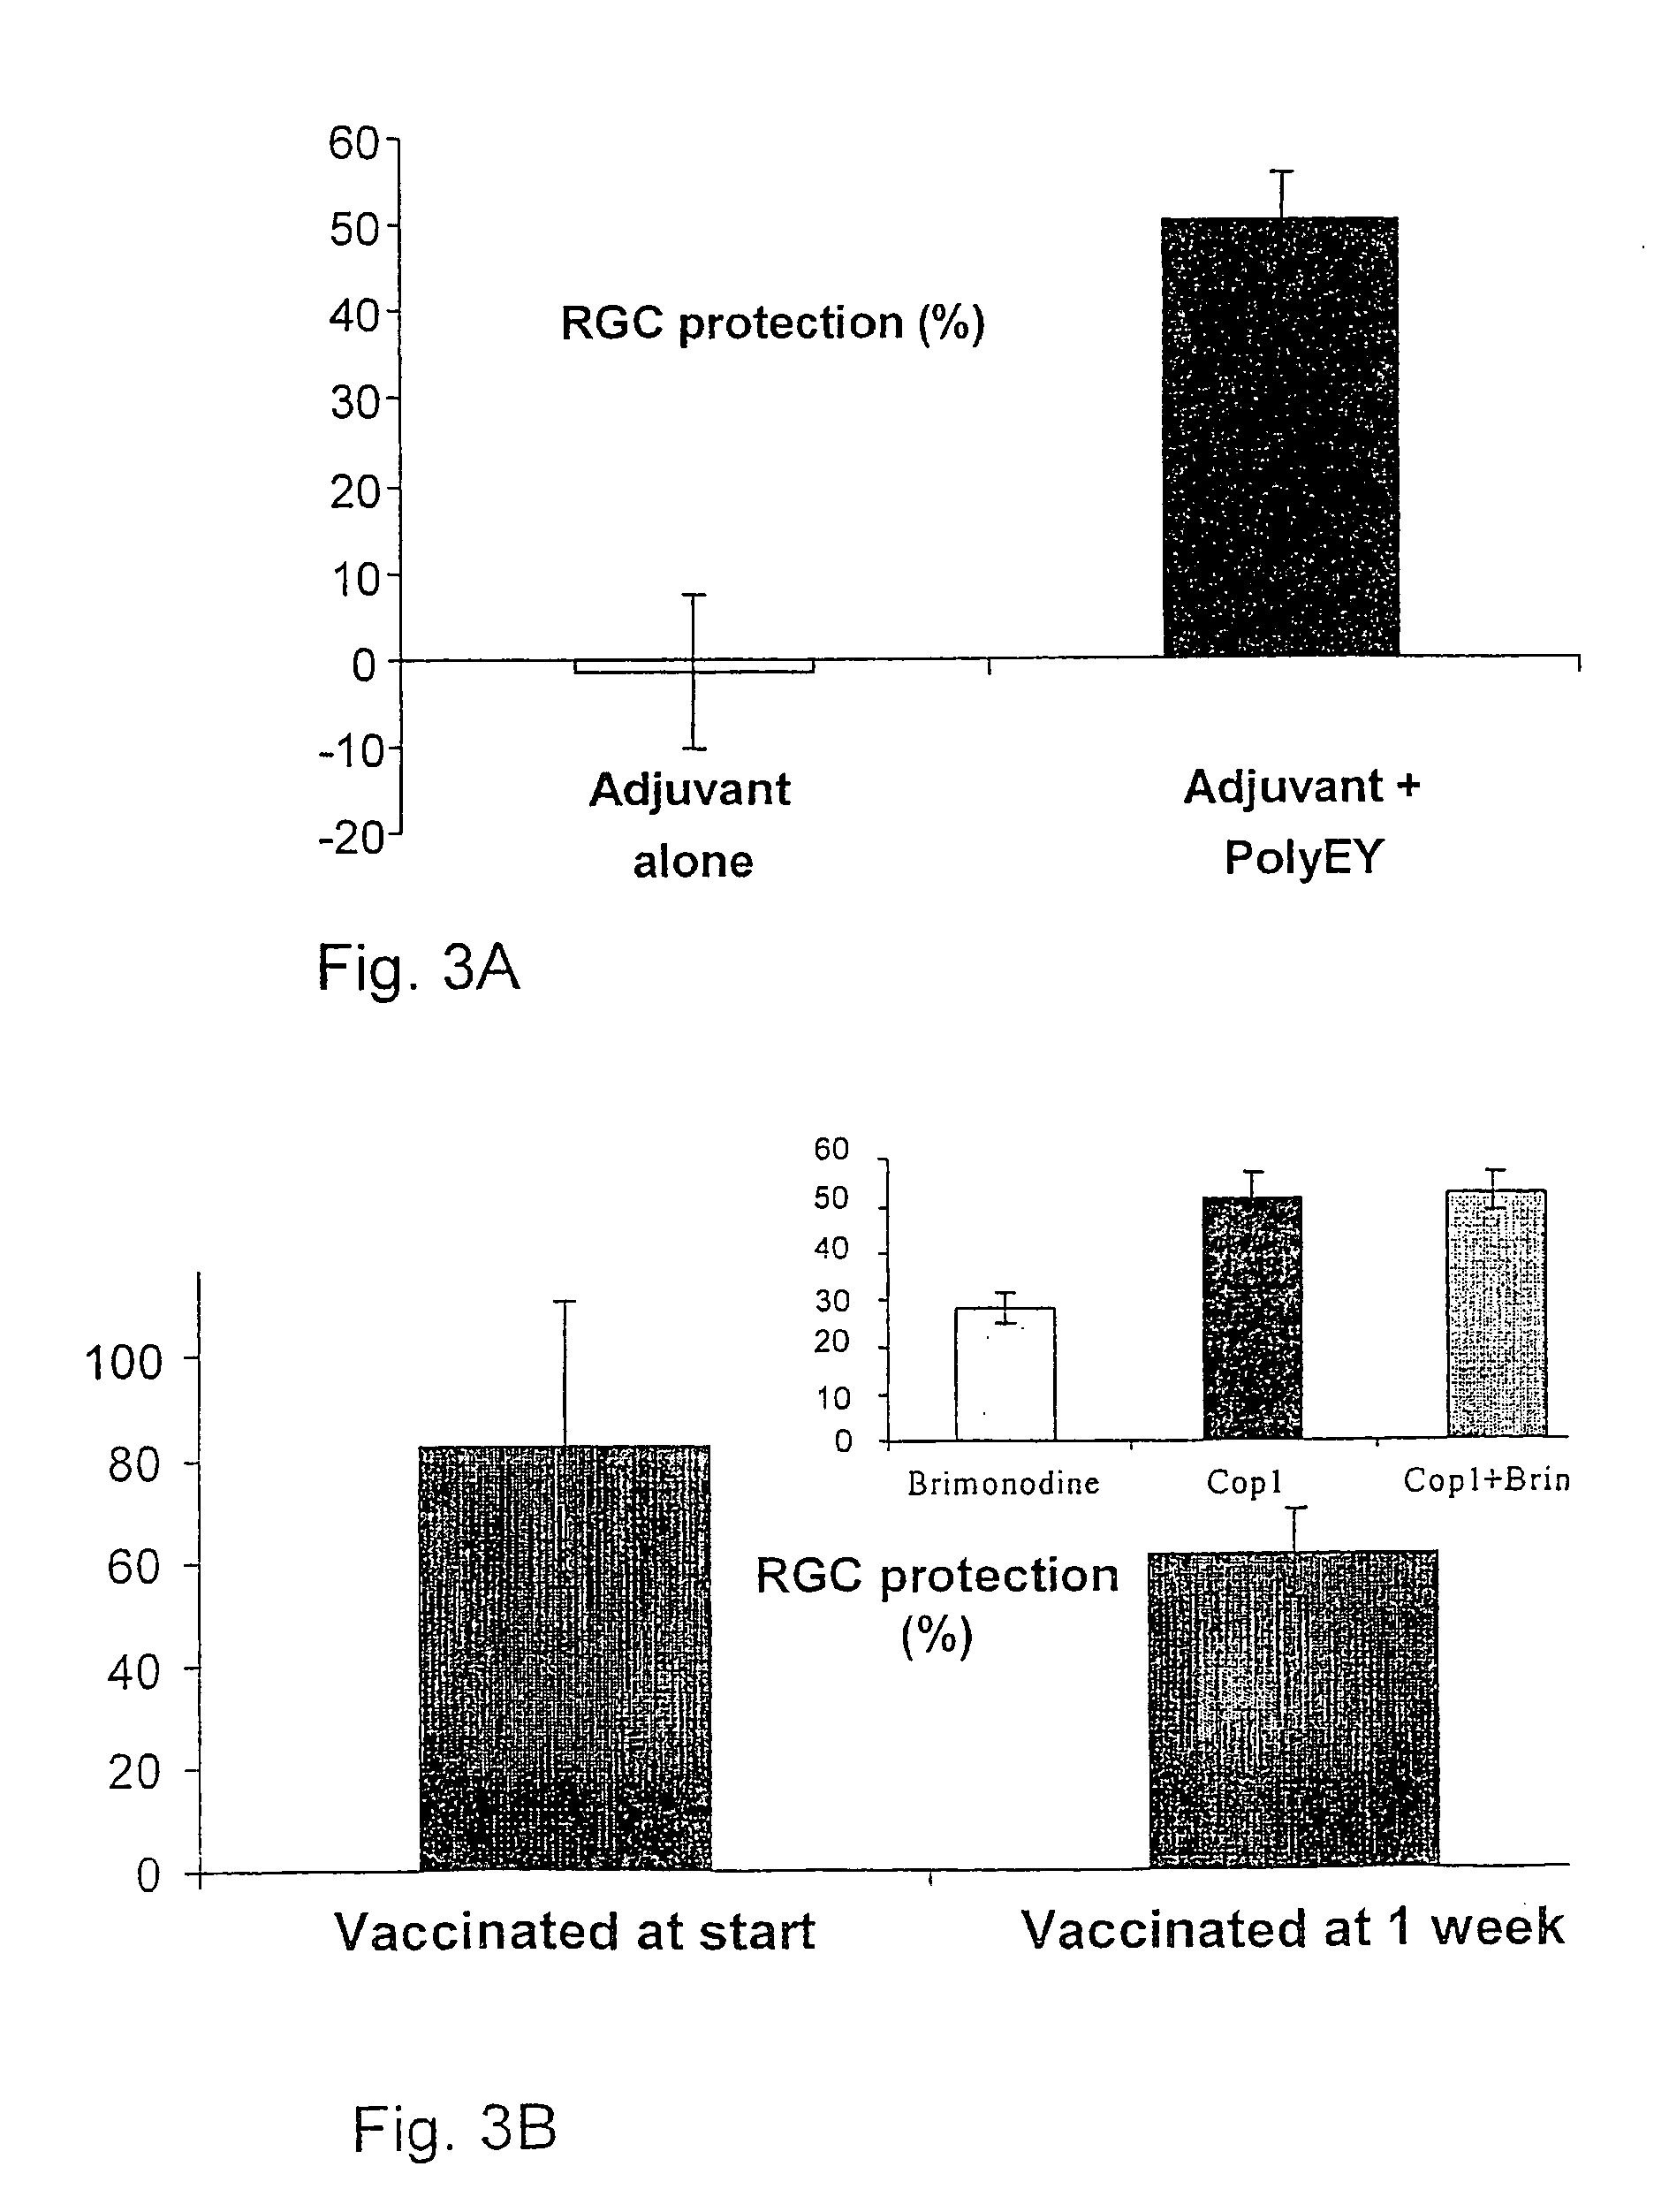 Method for neuronal protection in amyotrophic lateral sclerosis by a vaccine comprising Copolymer-1 or Copolymer-1 related peptides